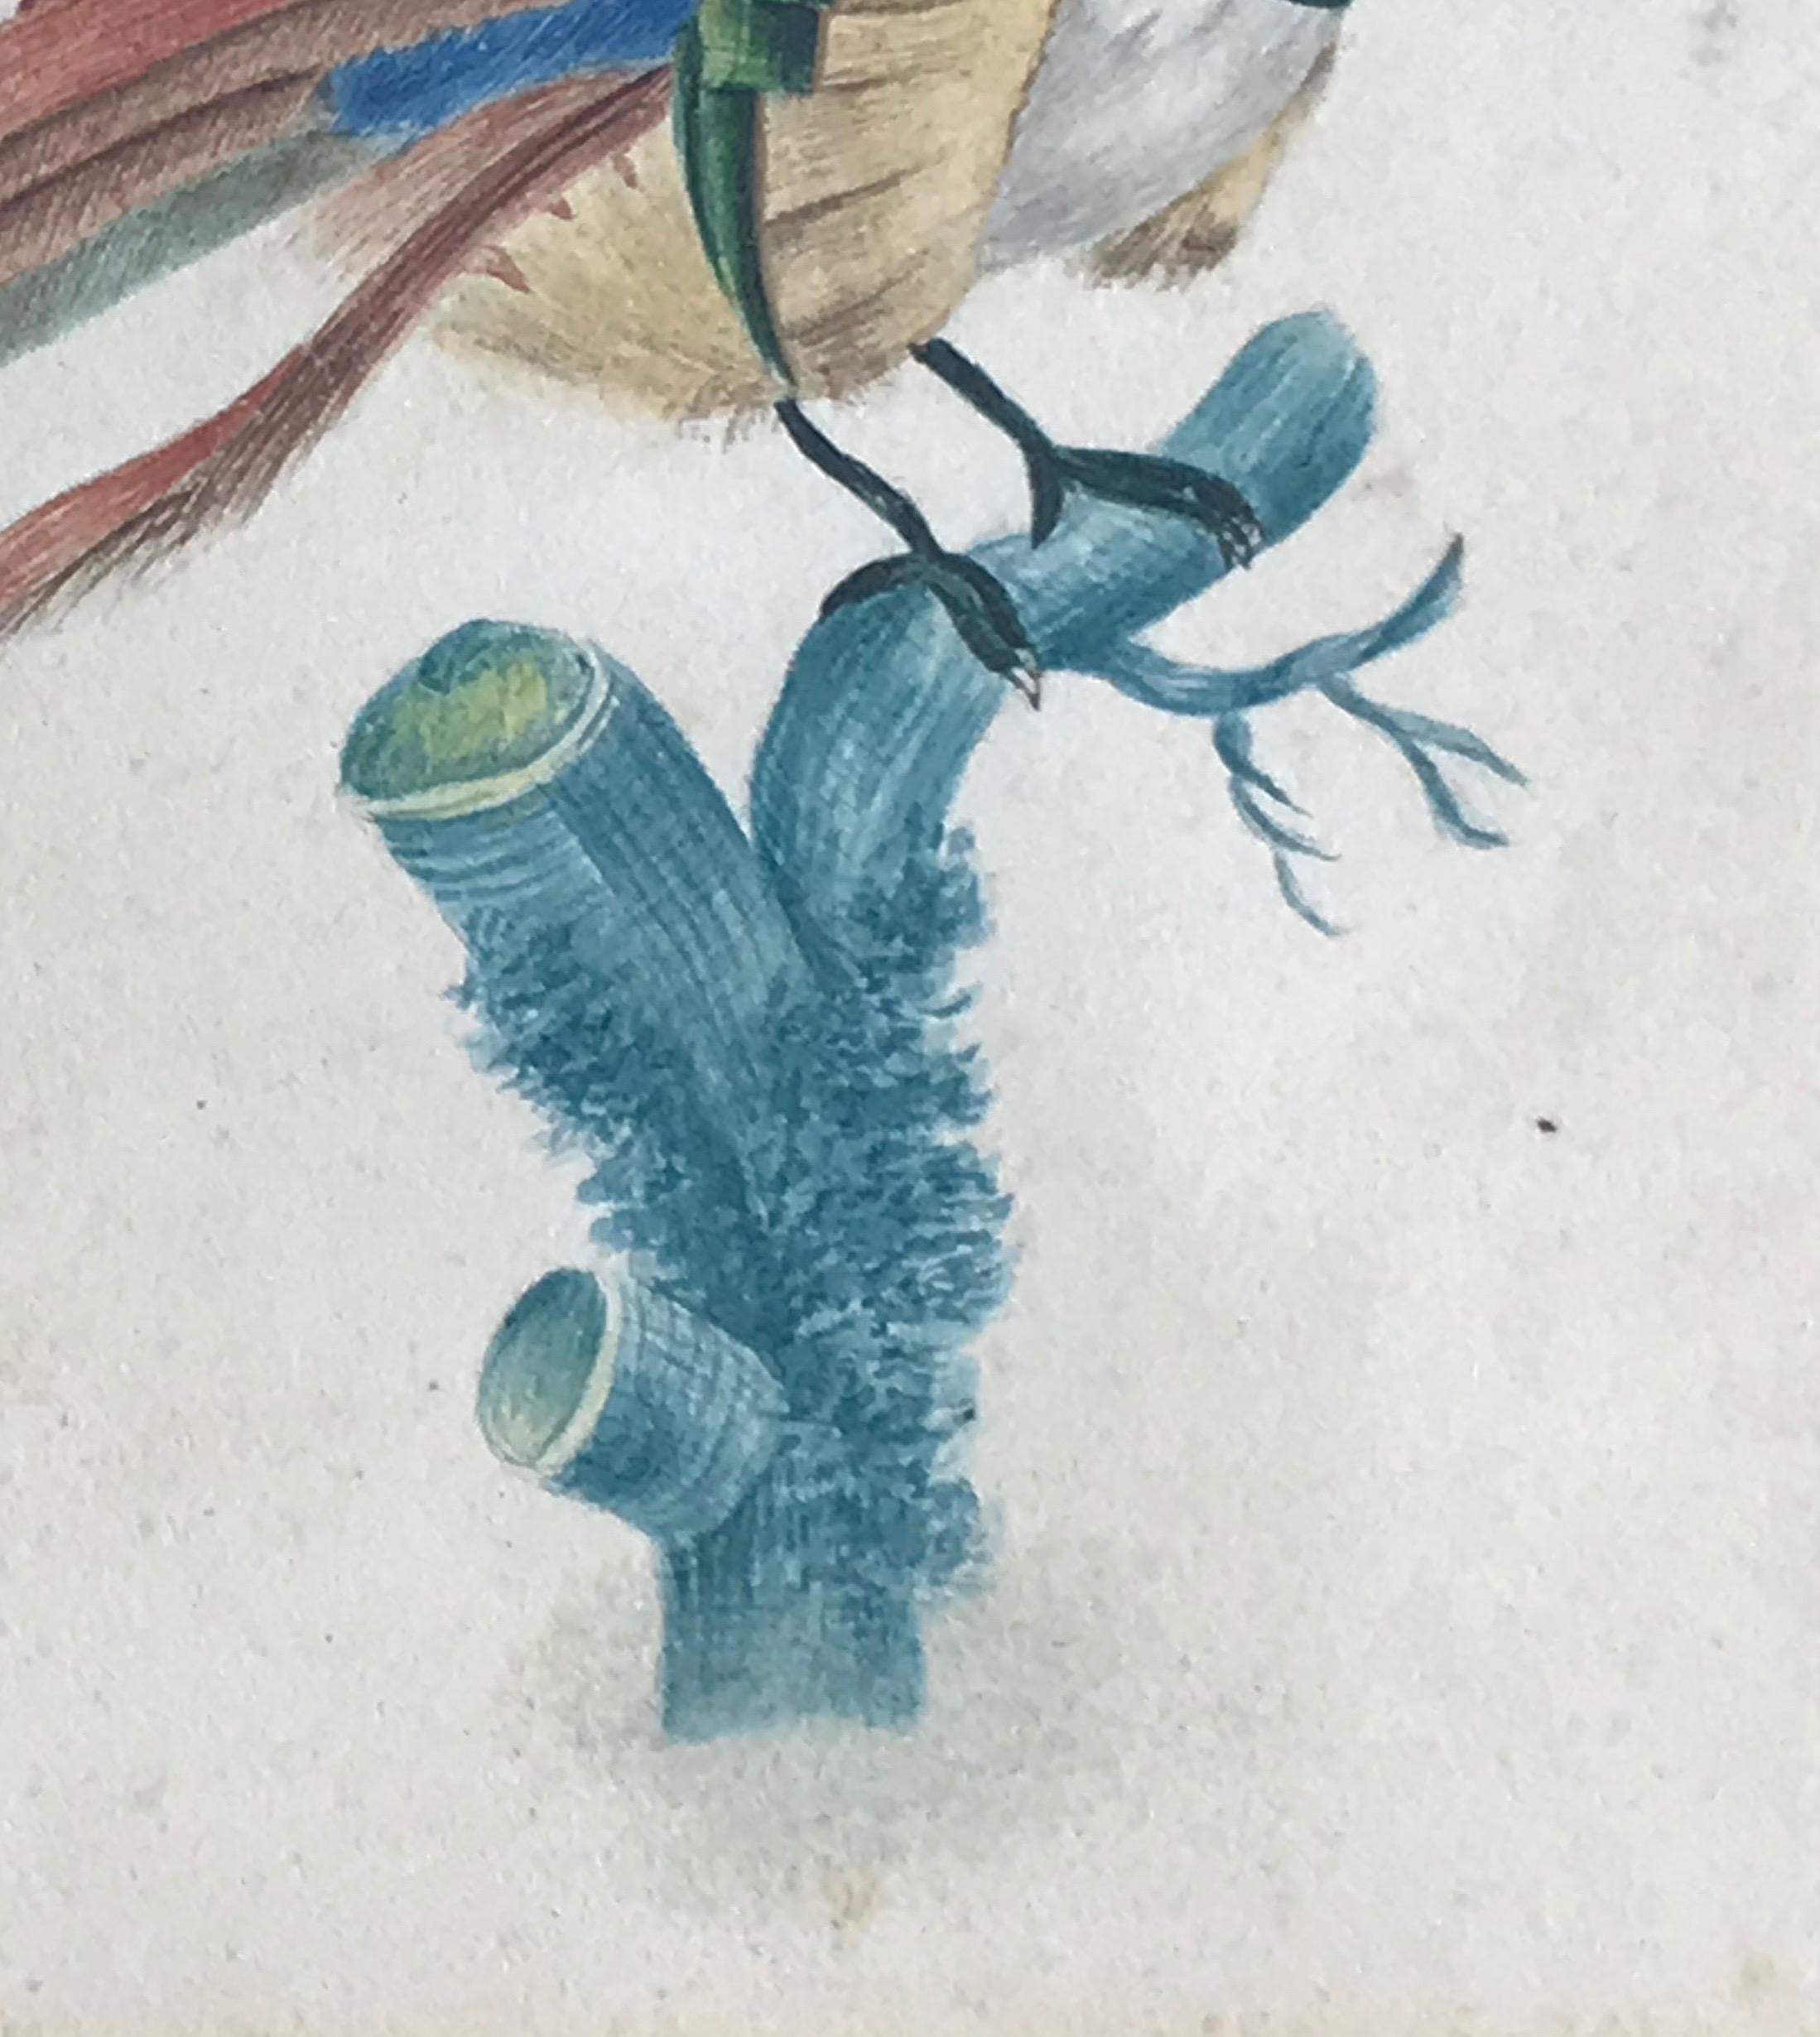 French School, early 19th Century
Study of a bird of paradise perched on a branch
Watercolour
4.75 x 4.5 inches
11.75 x 10.5 inches with the frame

A delicately painted study with attractive colour and detailing.